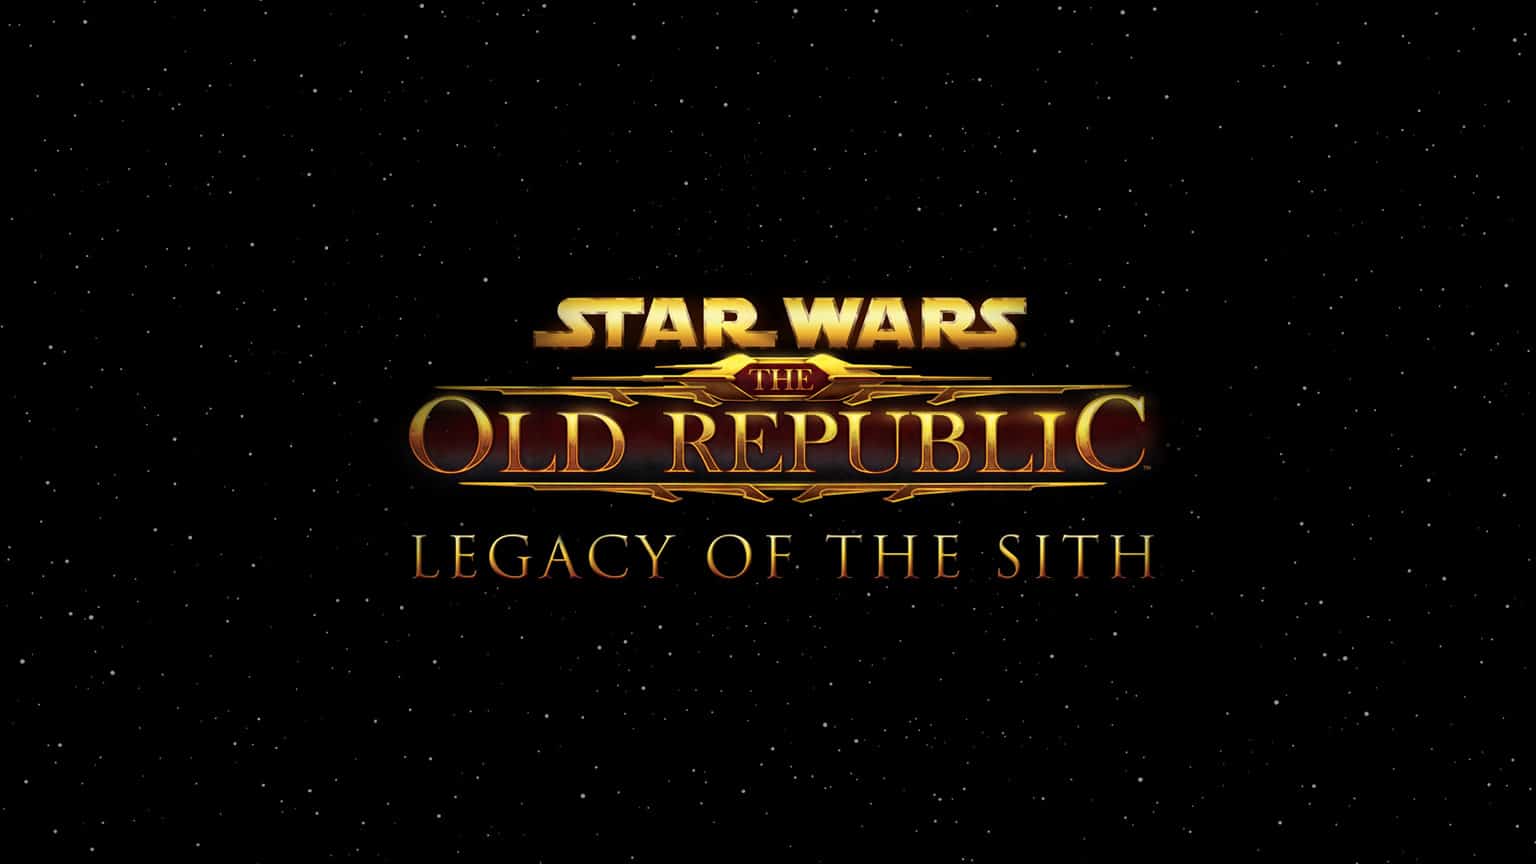 Star Wars The Old Republic - Legacy of the Sith, GamersRD